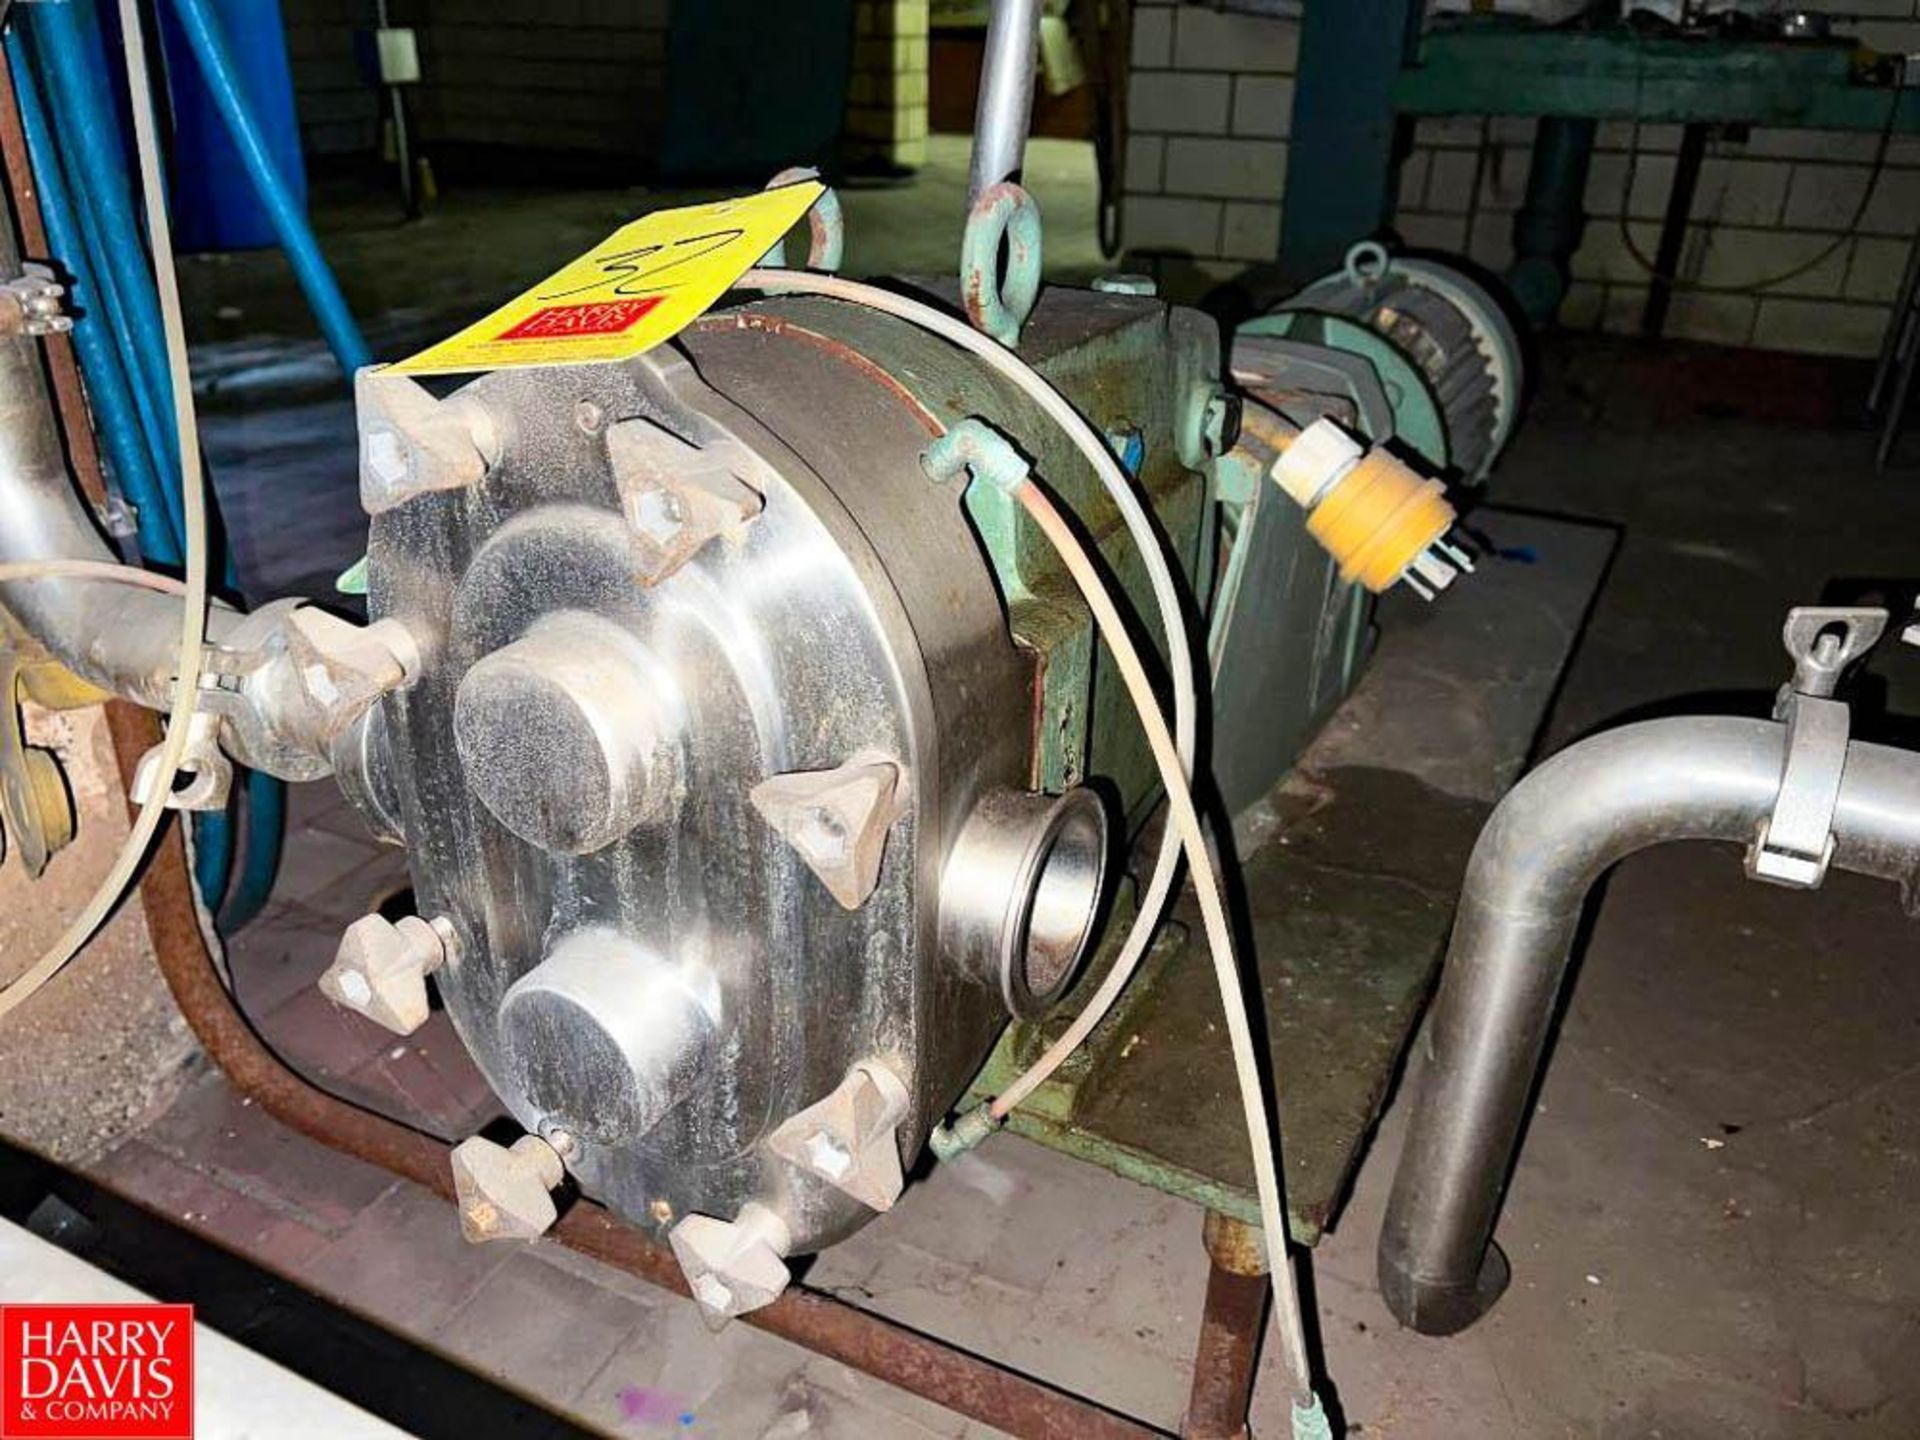 Waukesha Cherry-Burrell Positive Displacement Pump with 5 HP 1,725 RPM Motor 2.5" S/S Head, Clamp